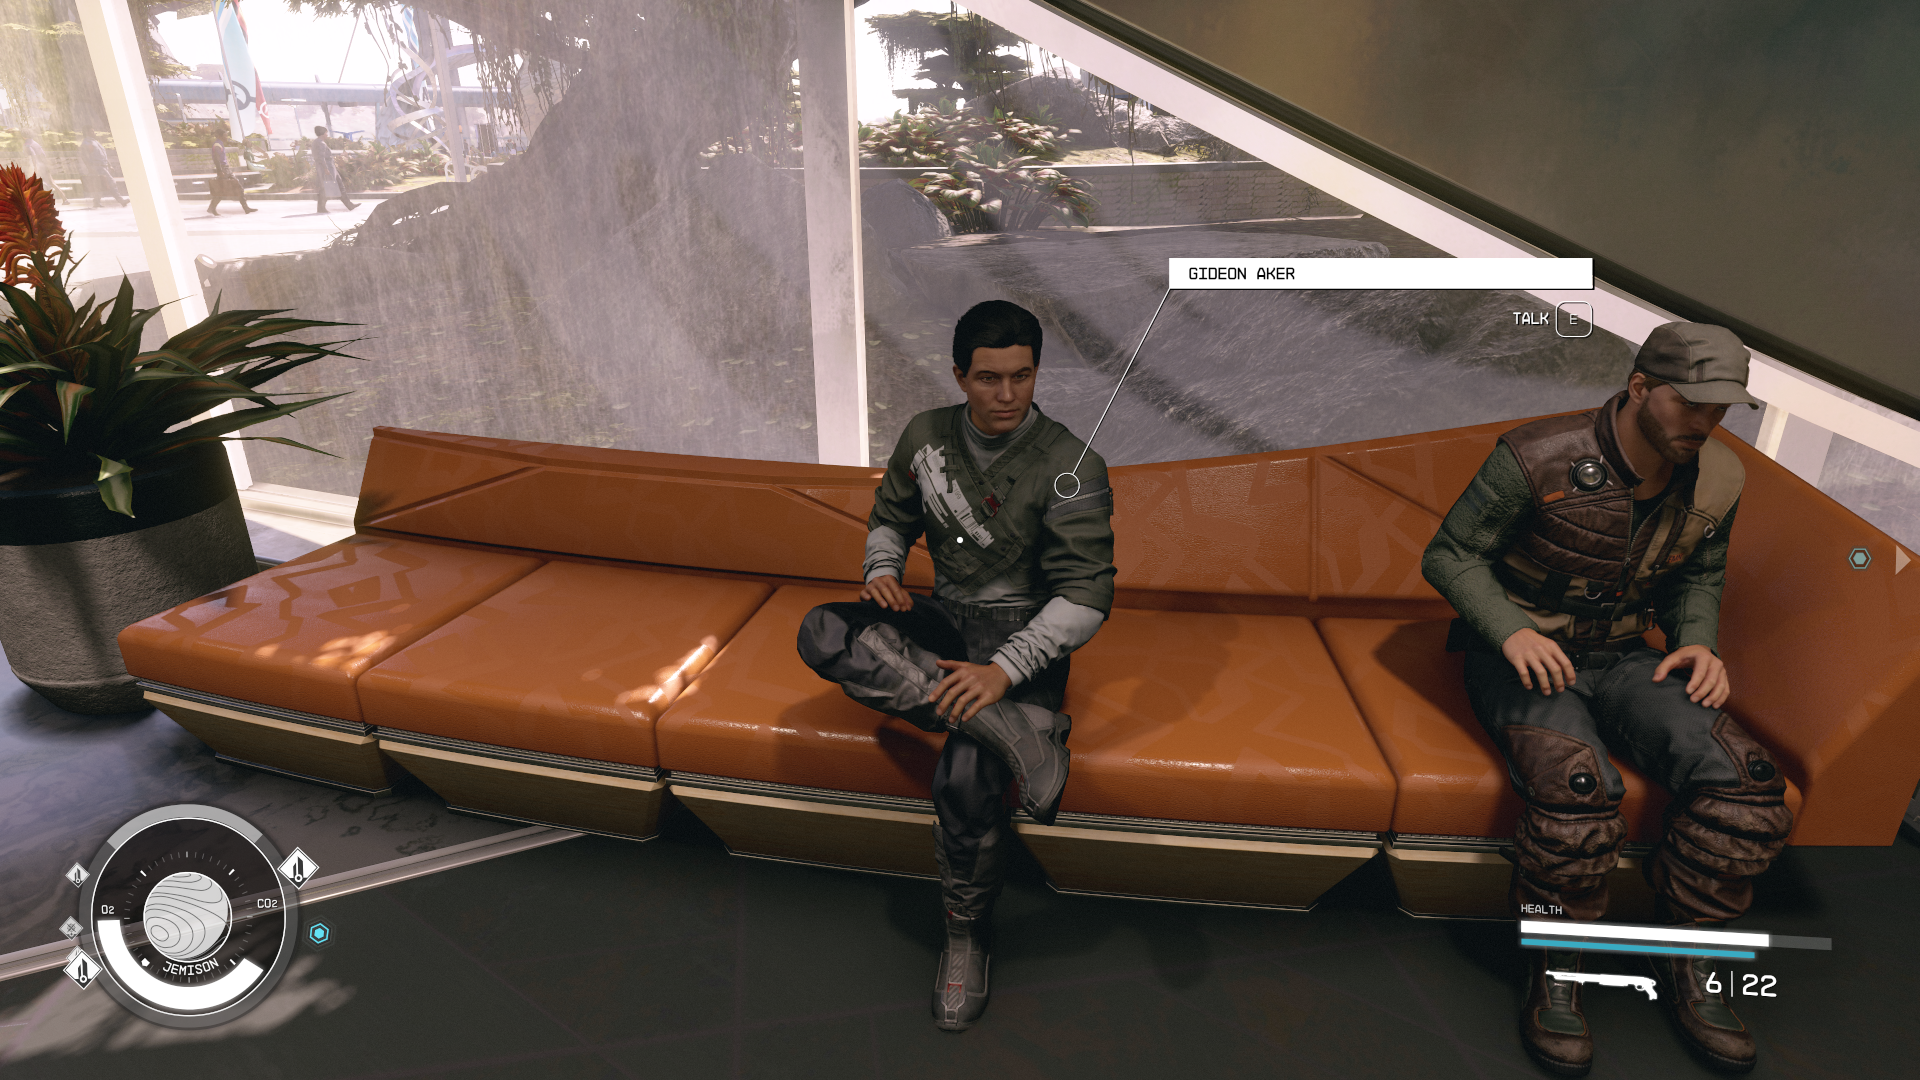 Starfield companions - Shot of man sitting next to another on a sofa